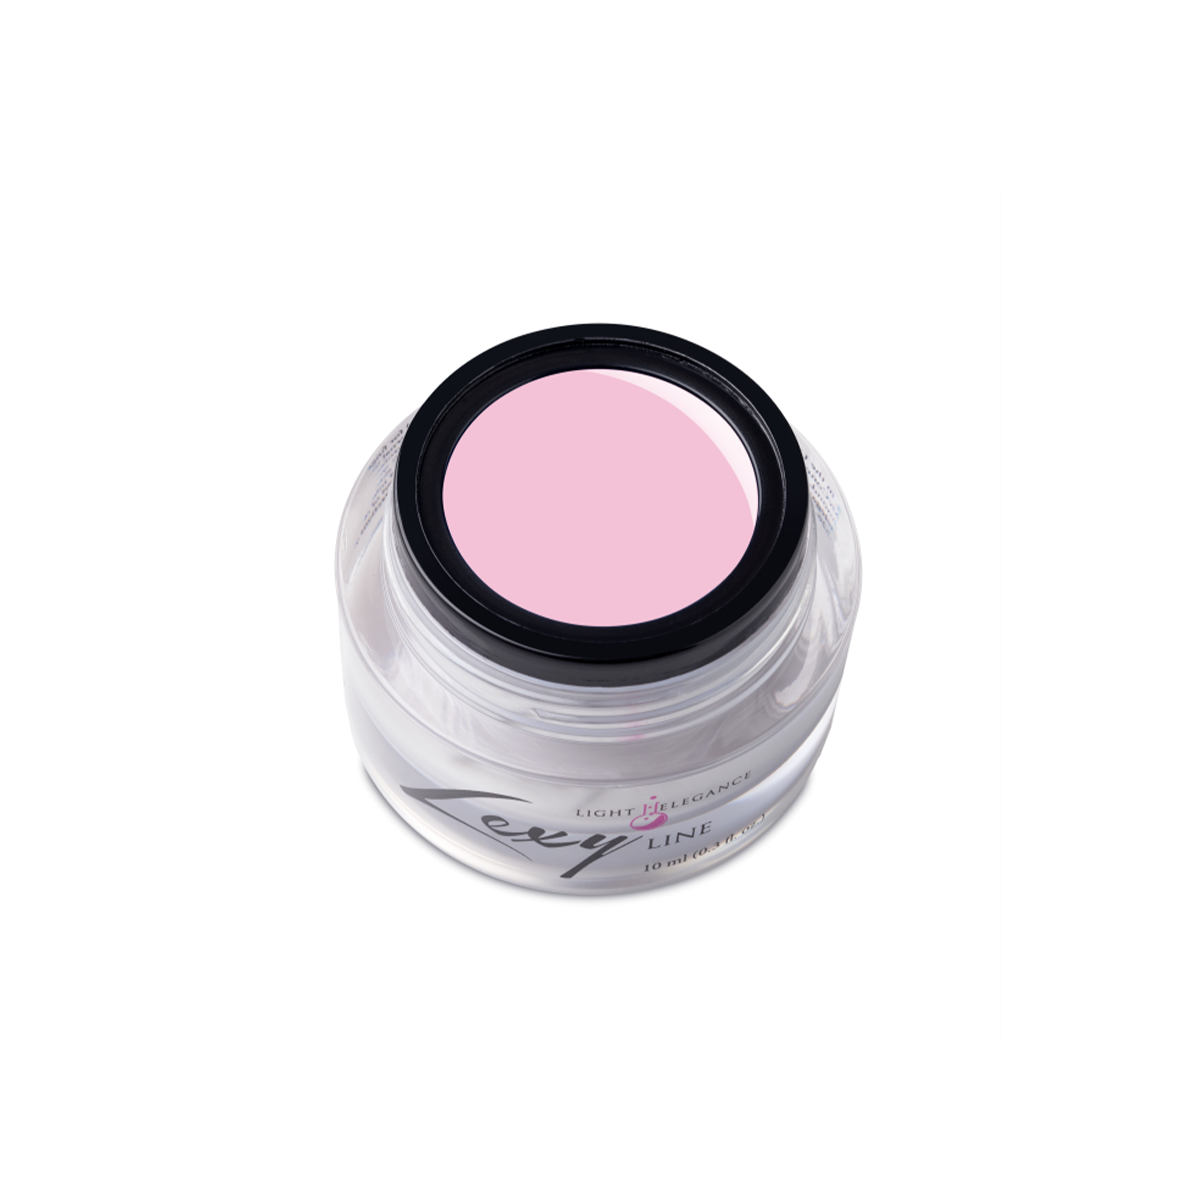 10 ml Baby Pink Extreme Lexy Line Building Gel